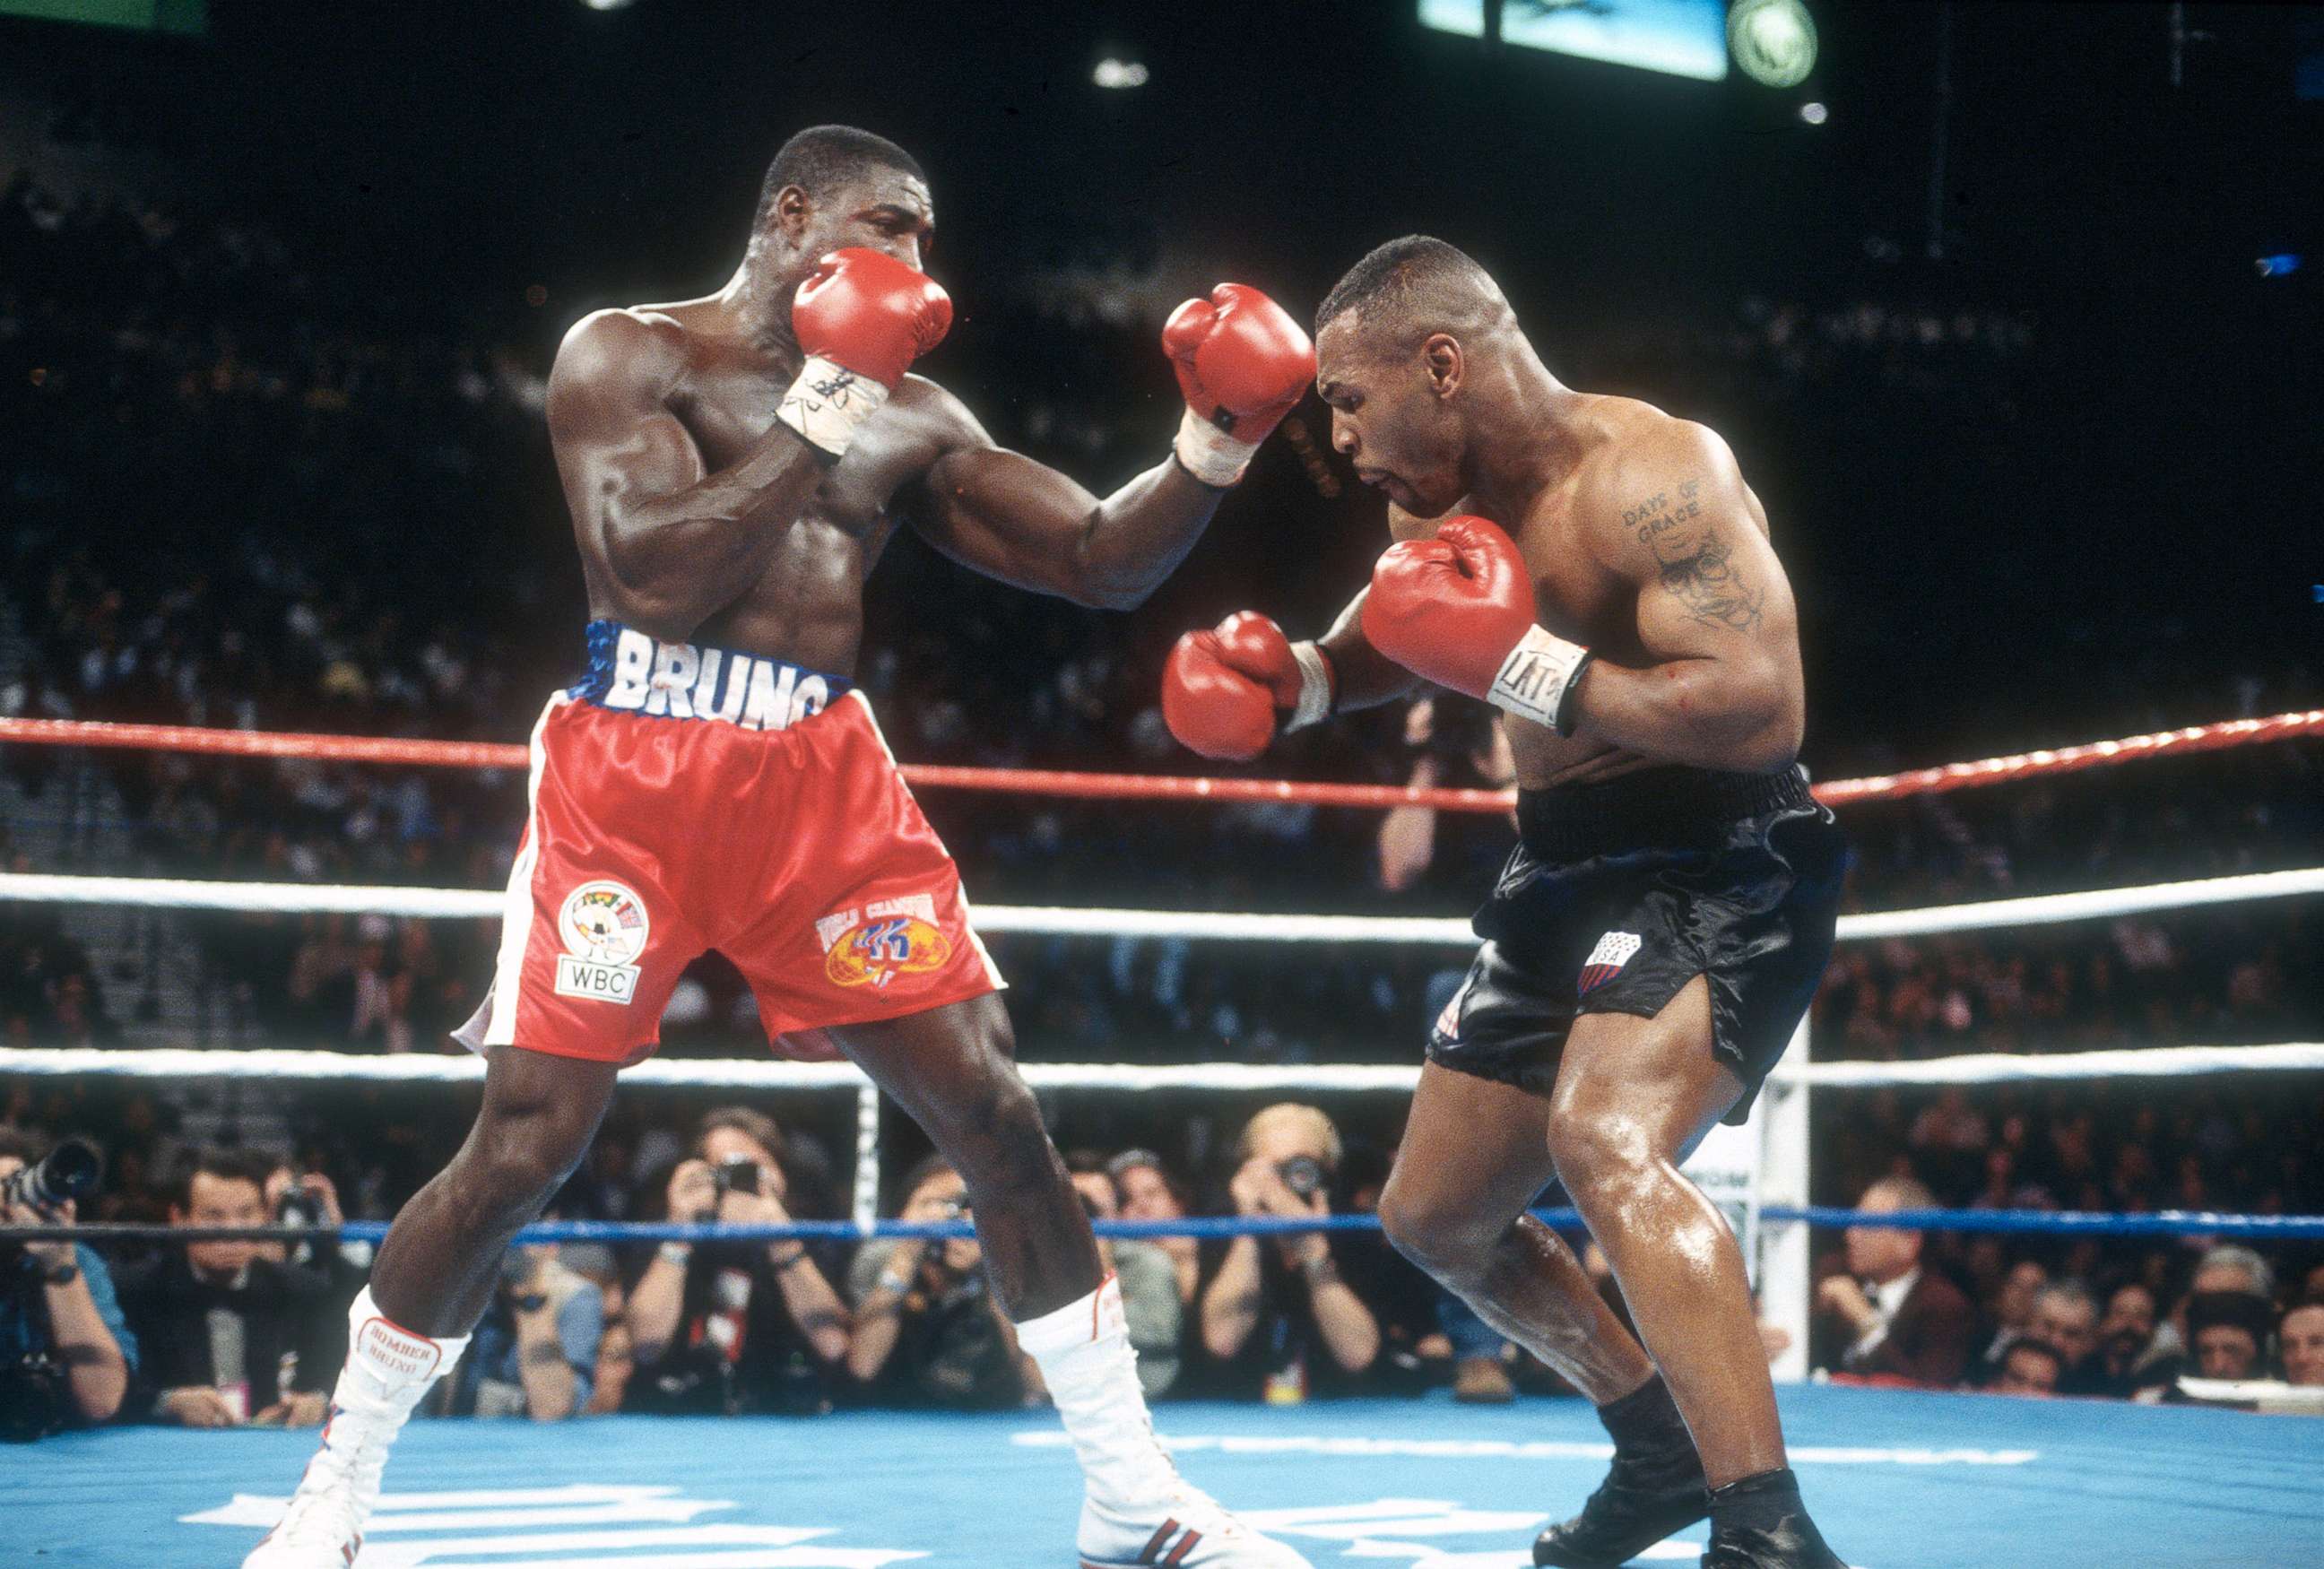 PHOTO: In this March 16, 1996, file photo, Mike Tyson and Frank Bruno fight for the WBC Heavyweight title at the MGM Grand Garden Arena in Las Vegas. Tyson won the fight with a 5th round TKO.